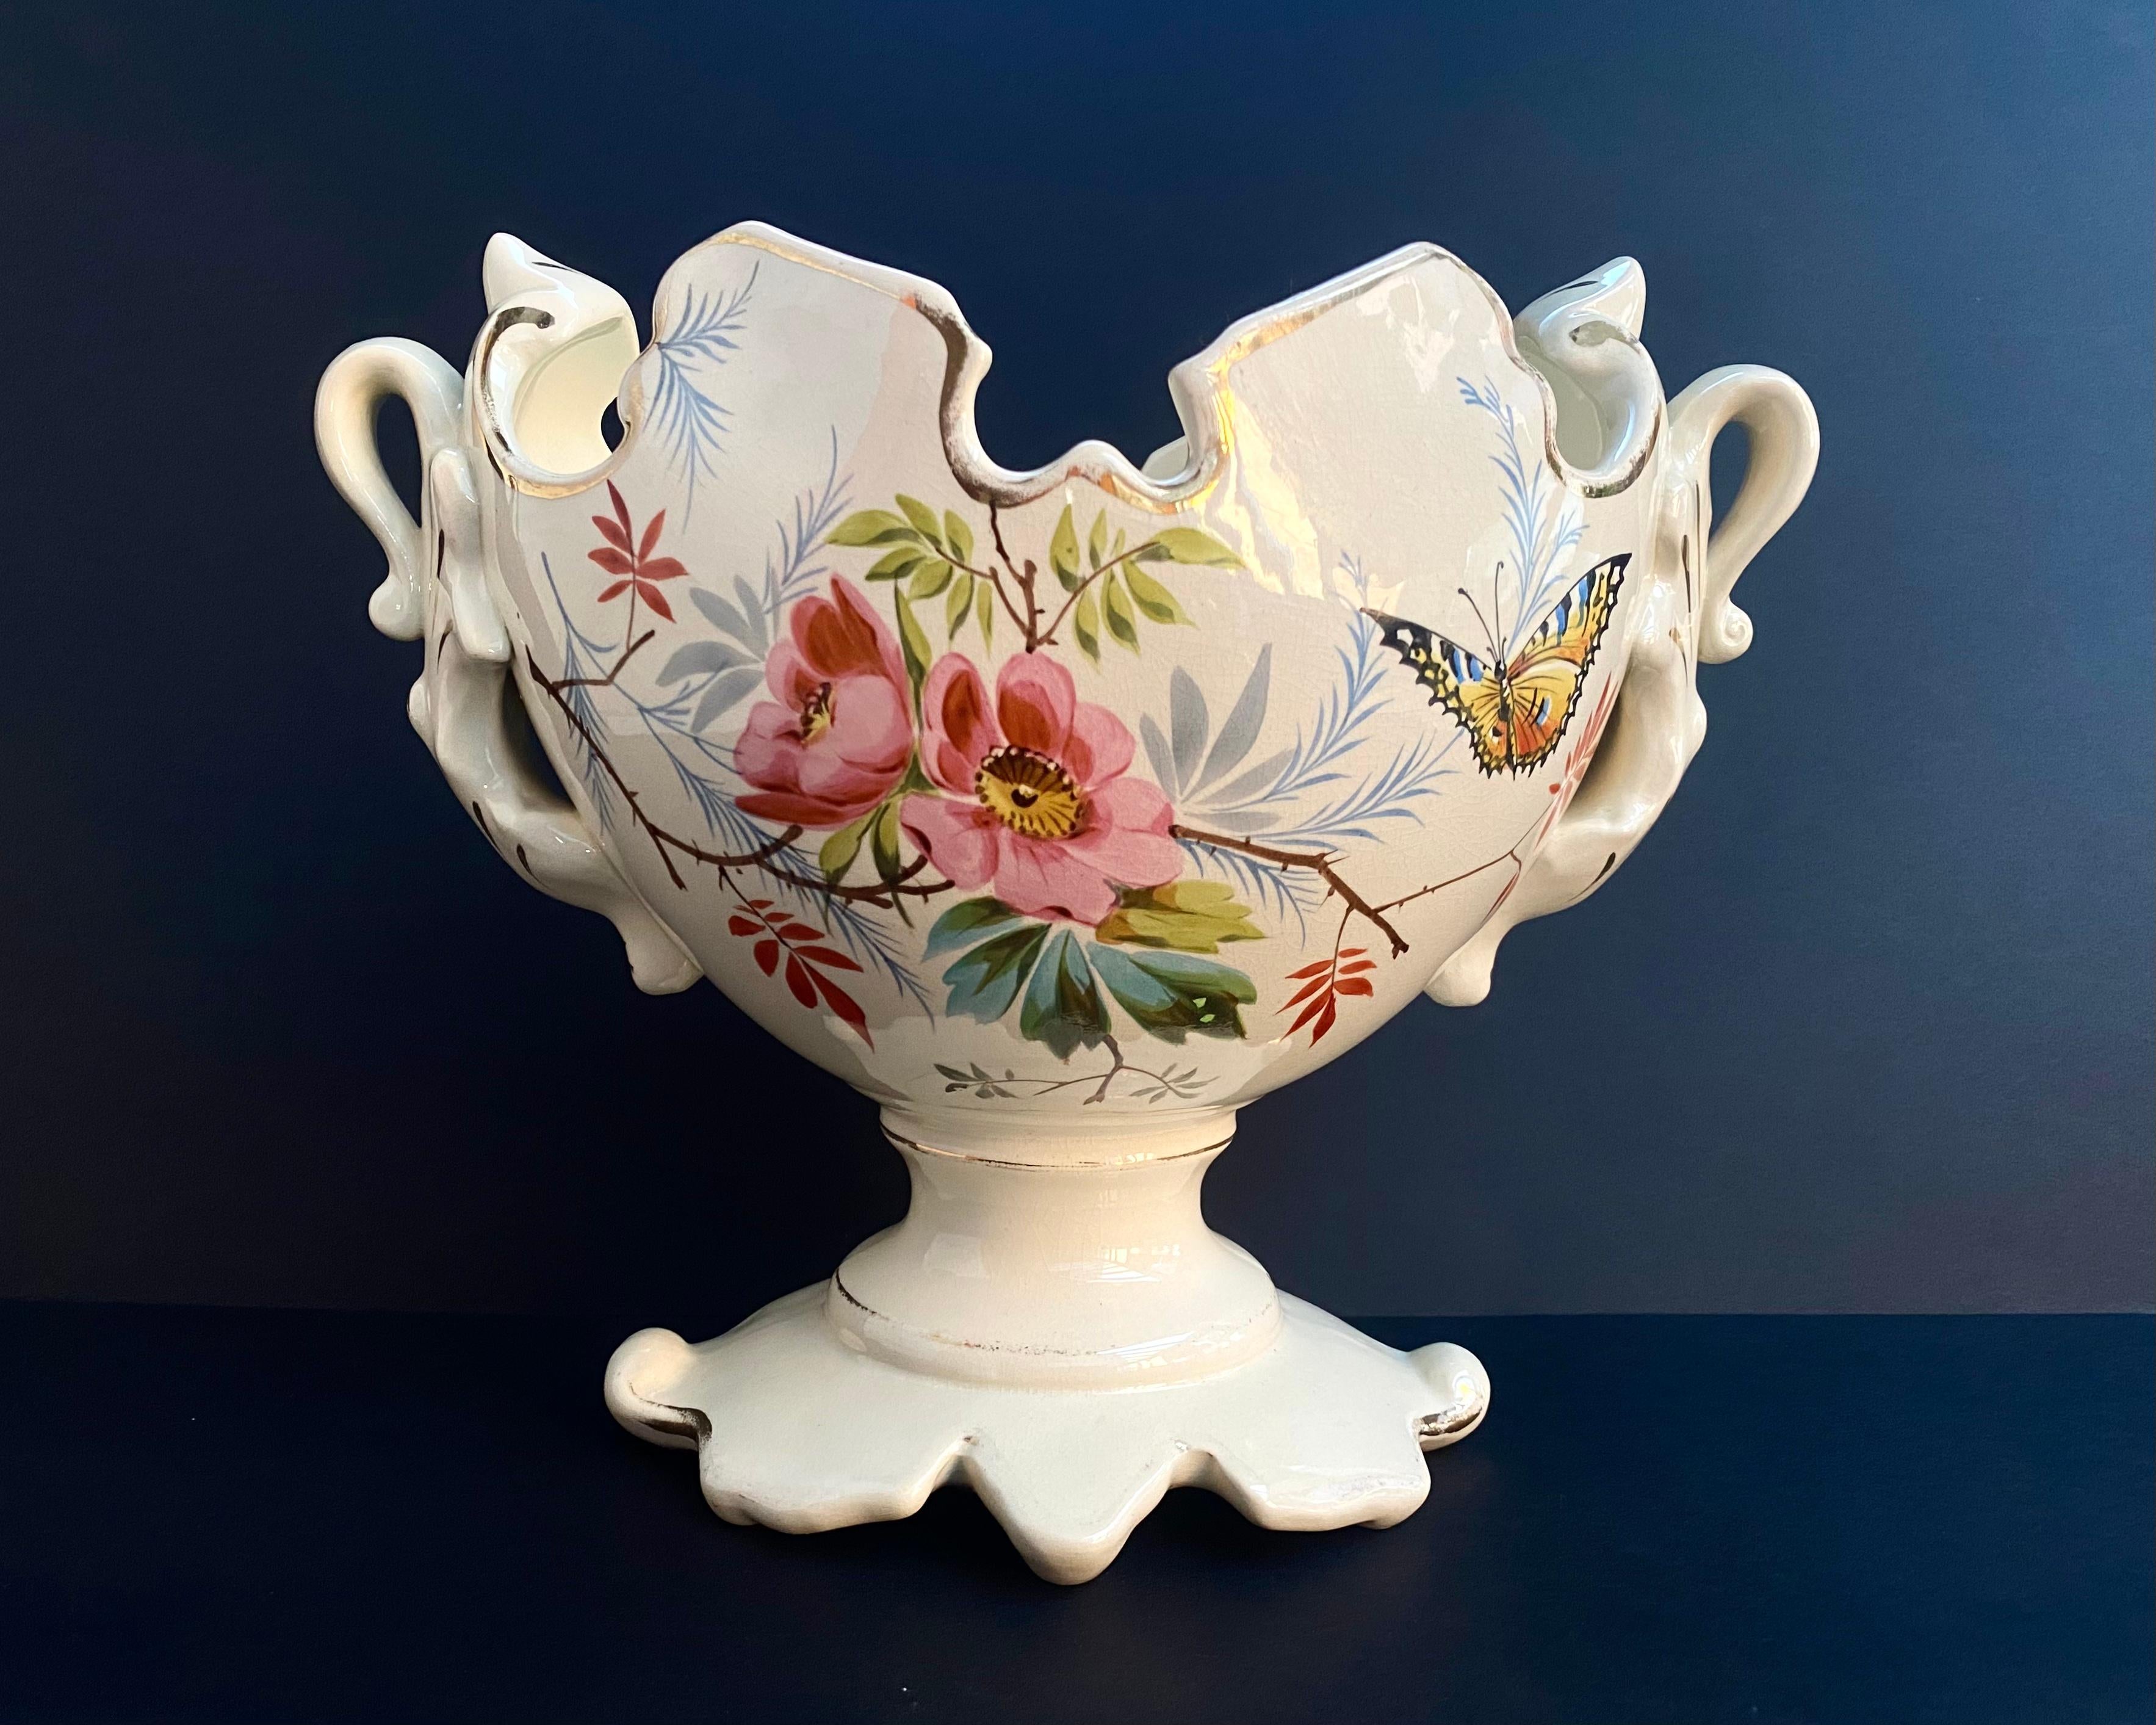 Large Vintage ceramic French planter, centerpiece, Regency style, hand painted with flowers and a butterfly, circa 1950.

Beautiful hand painted flower design on an off-white cream colored base with golden rims, has swan-like handles and sculpted